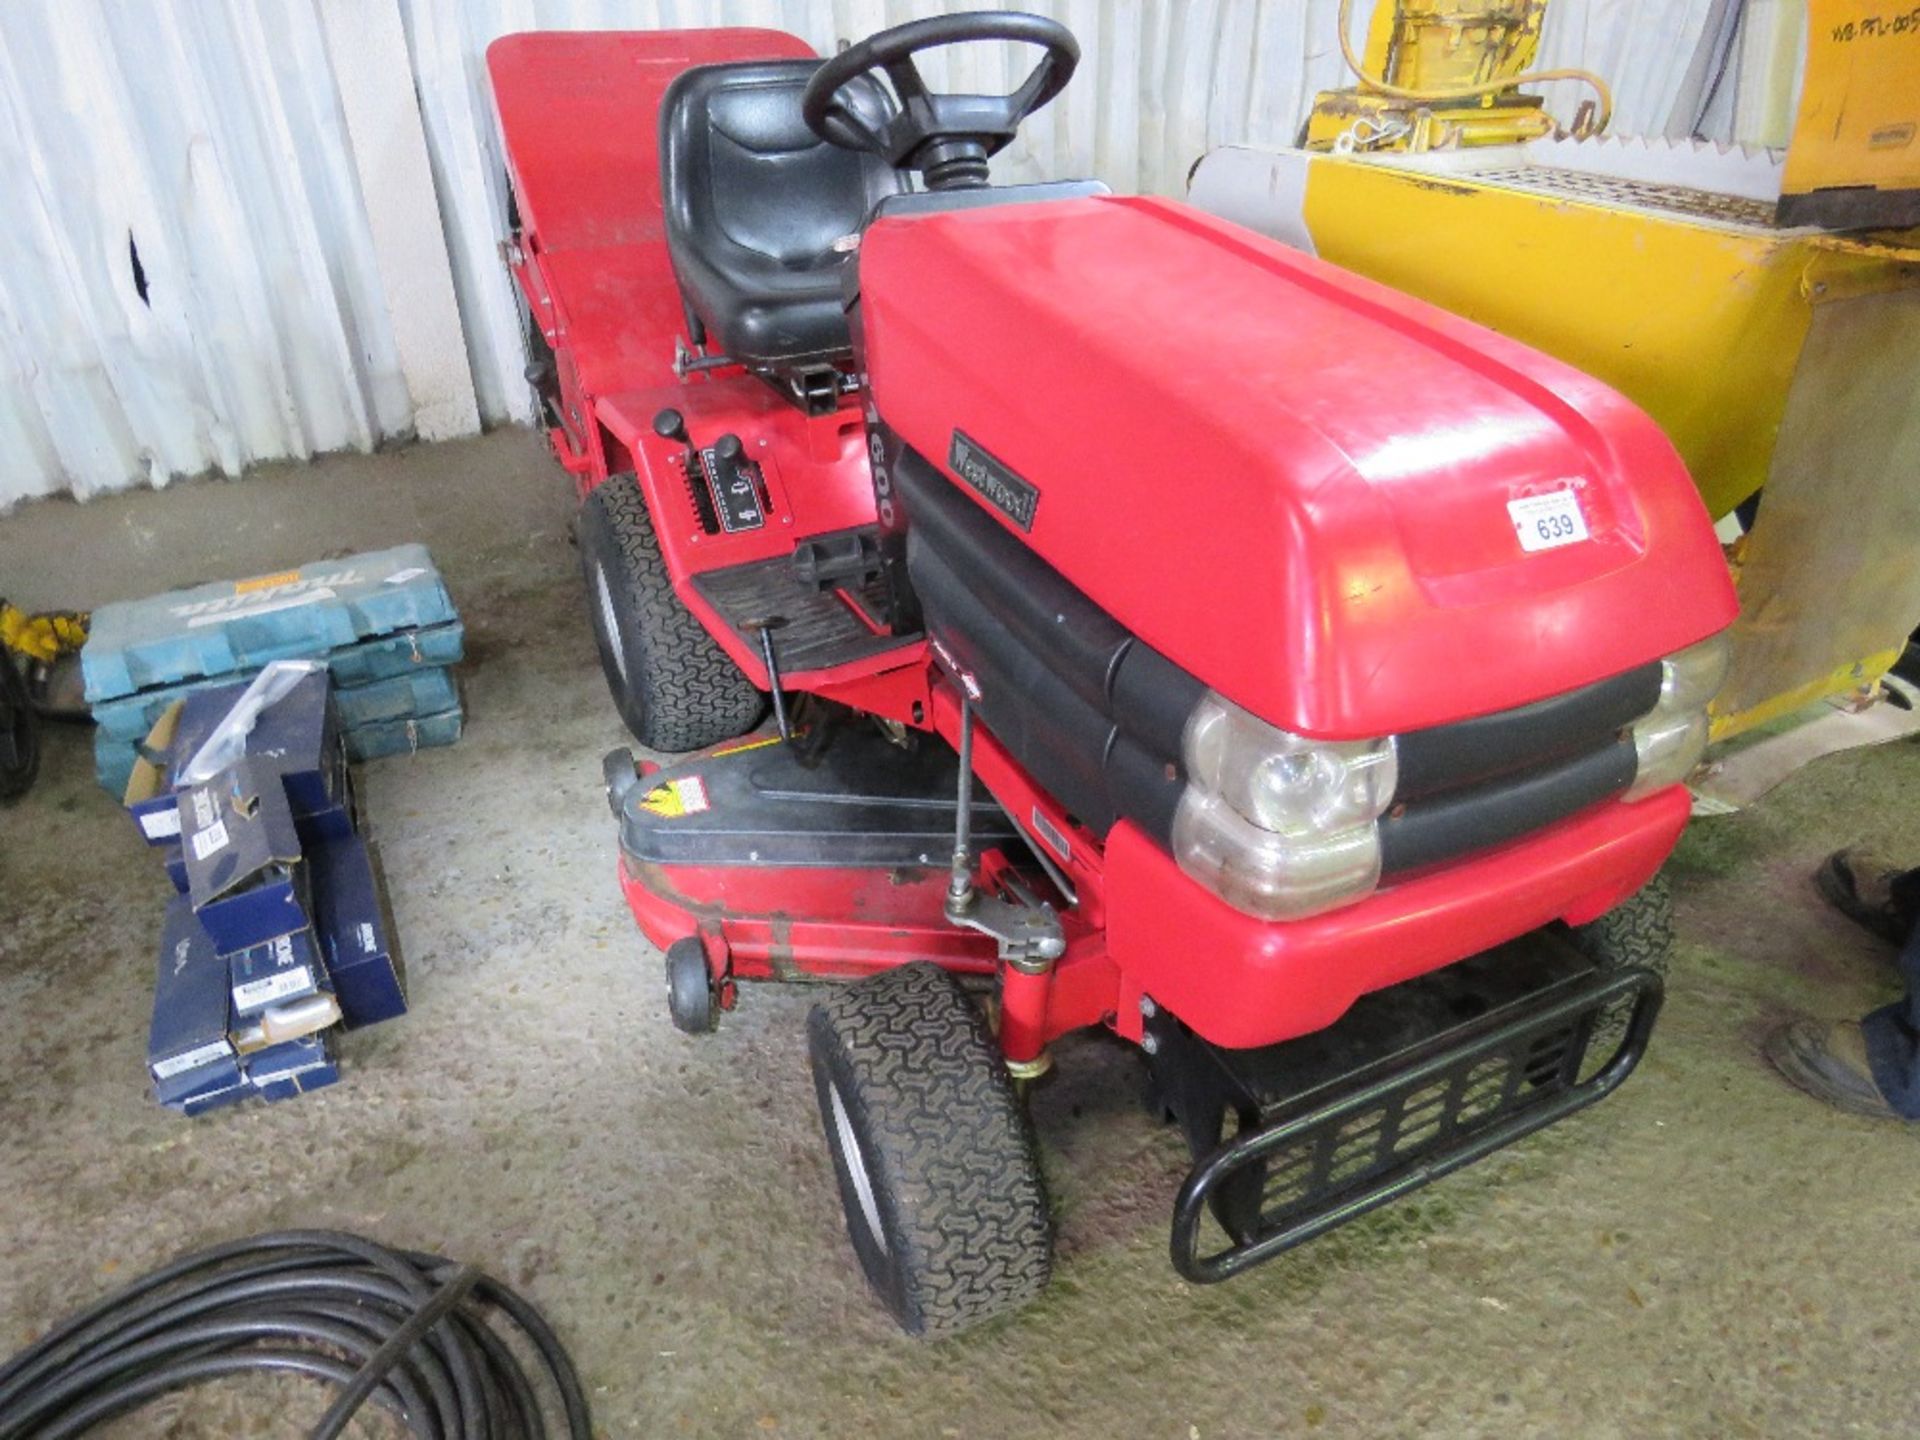 WESTWOOD T1600 HYDRO RIDE ON MOWER WITH COLLECTOR. WHEN TESTED WAS SEEN TO RUN, DRIVE, AND BLADES TU